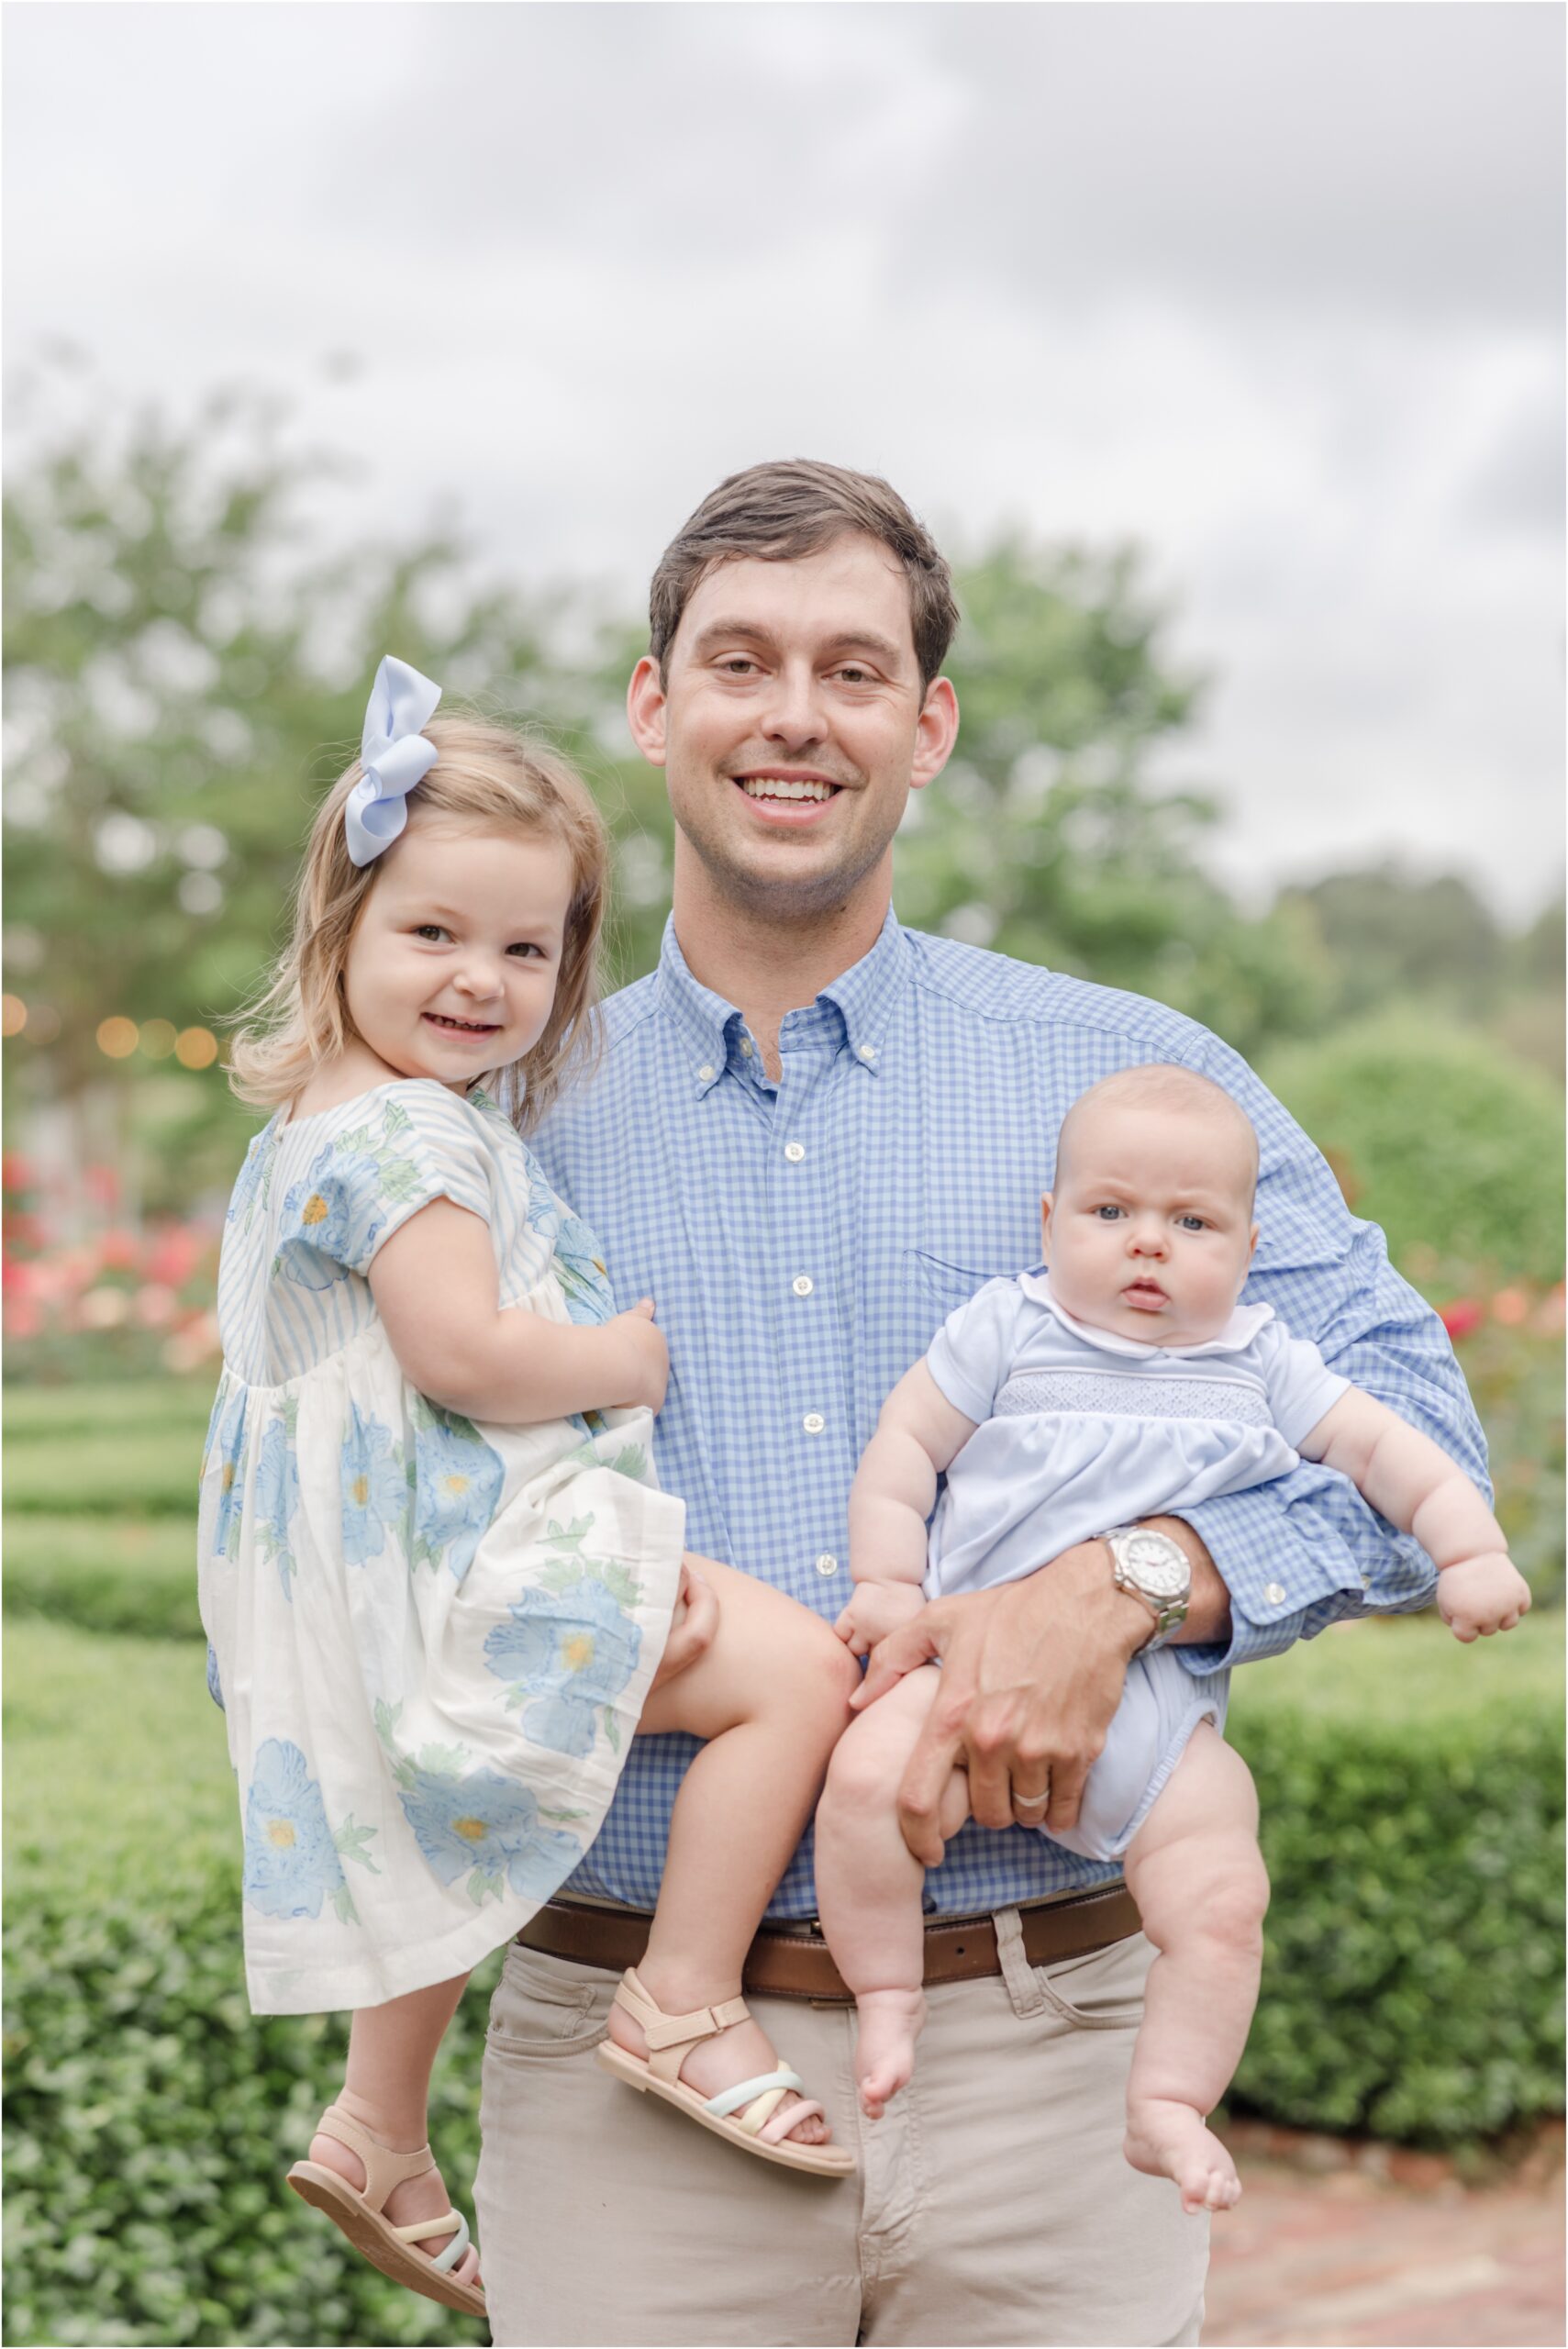 Greenville family photography portraits of a parents with their toddler daughter and baby son in the Janie E Furman Rose Garden.